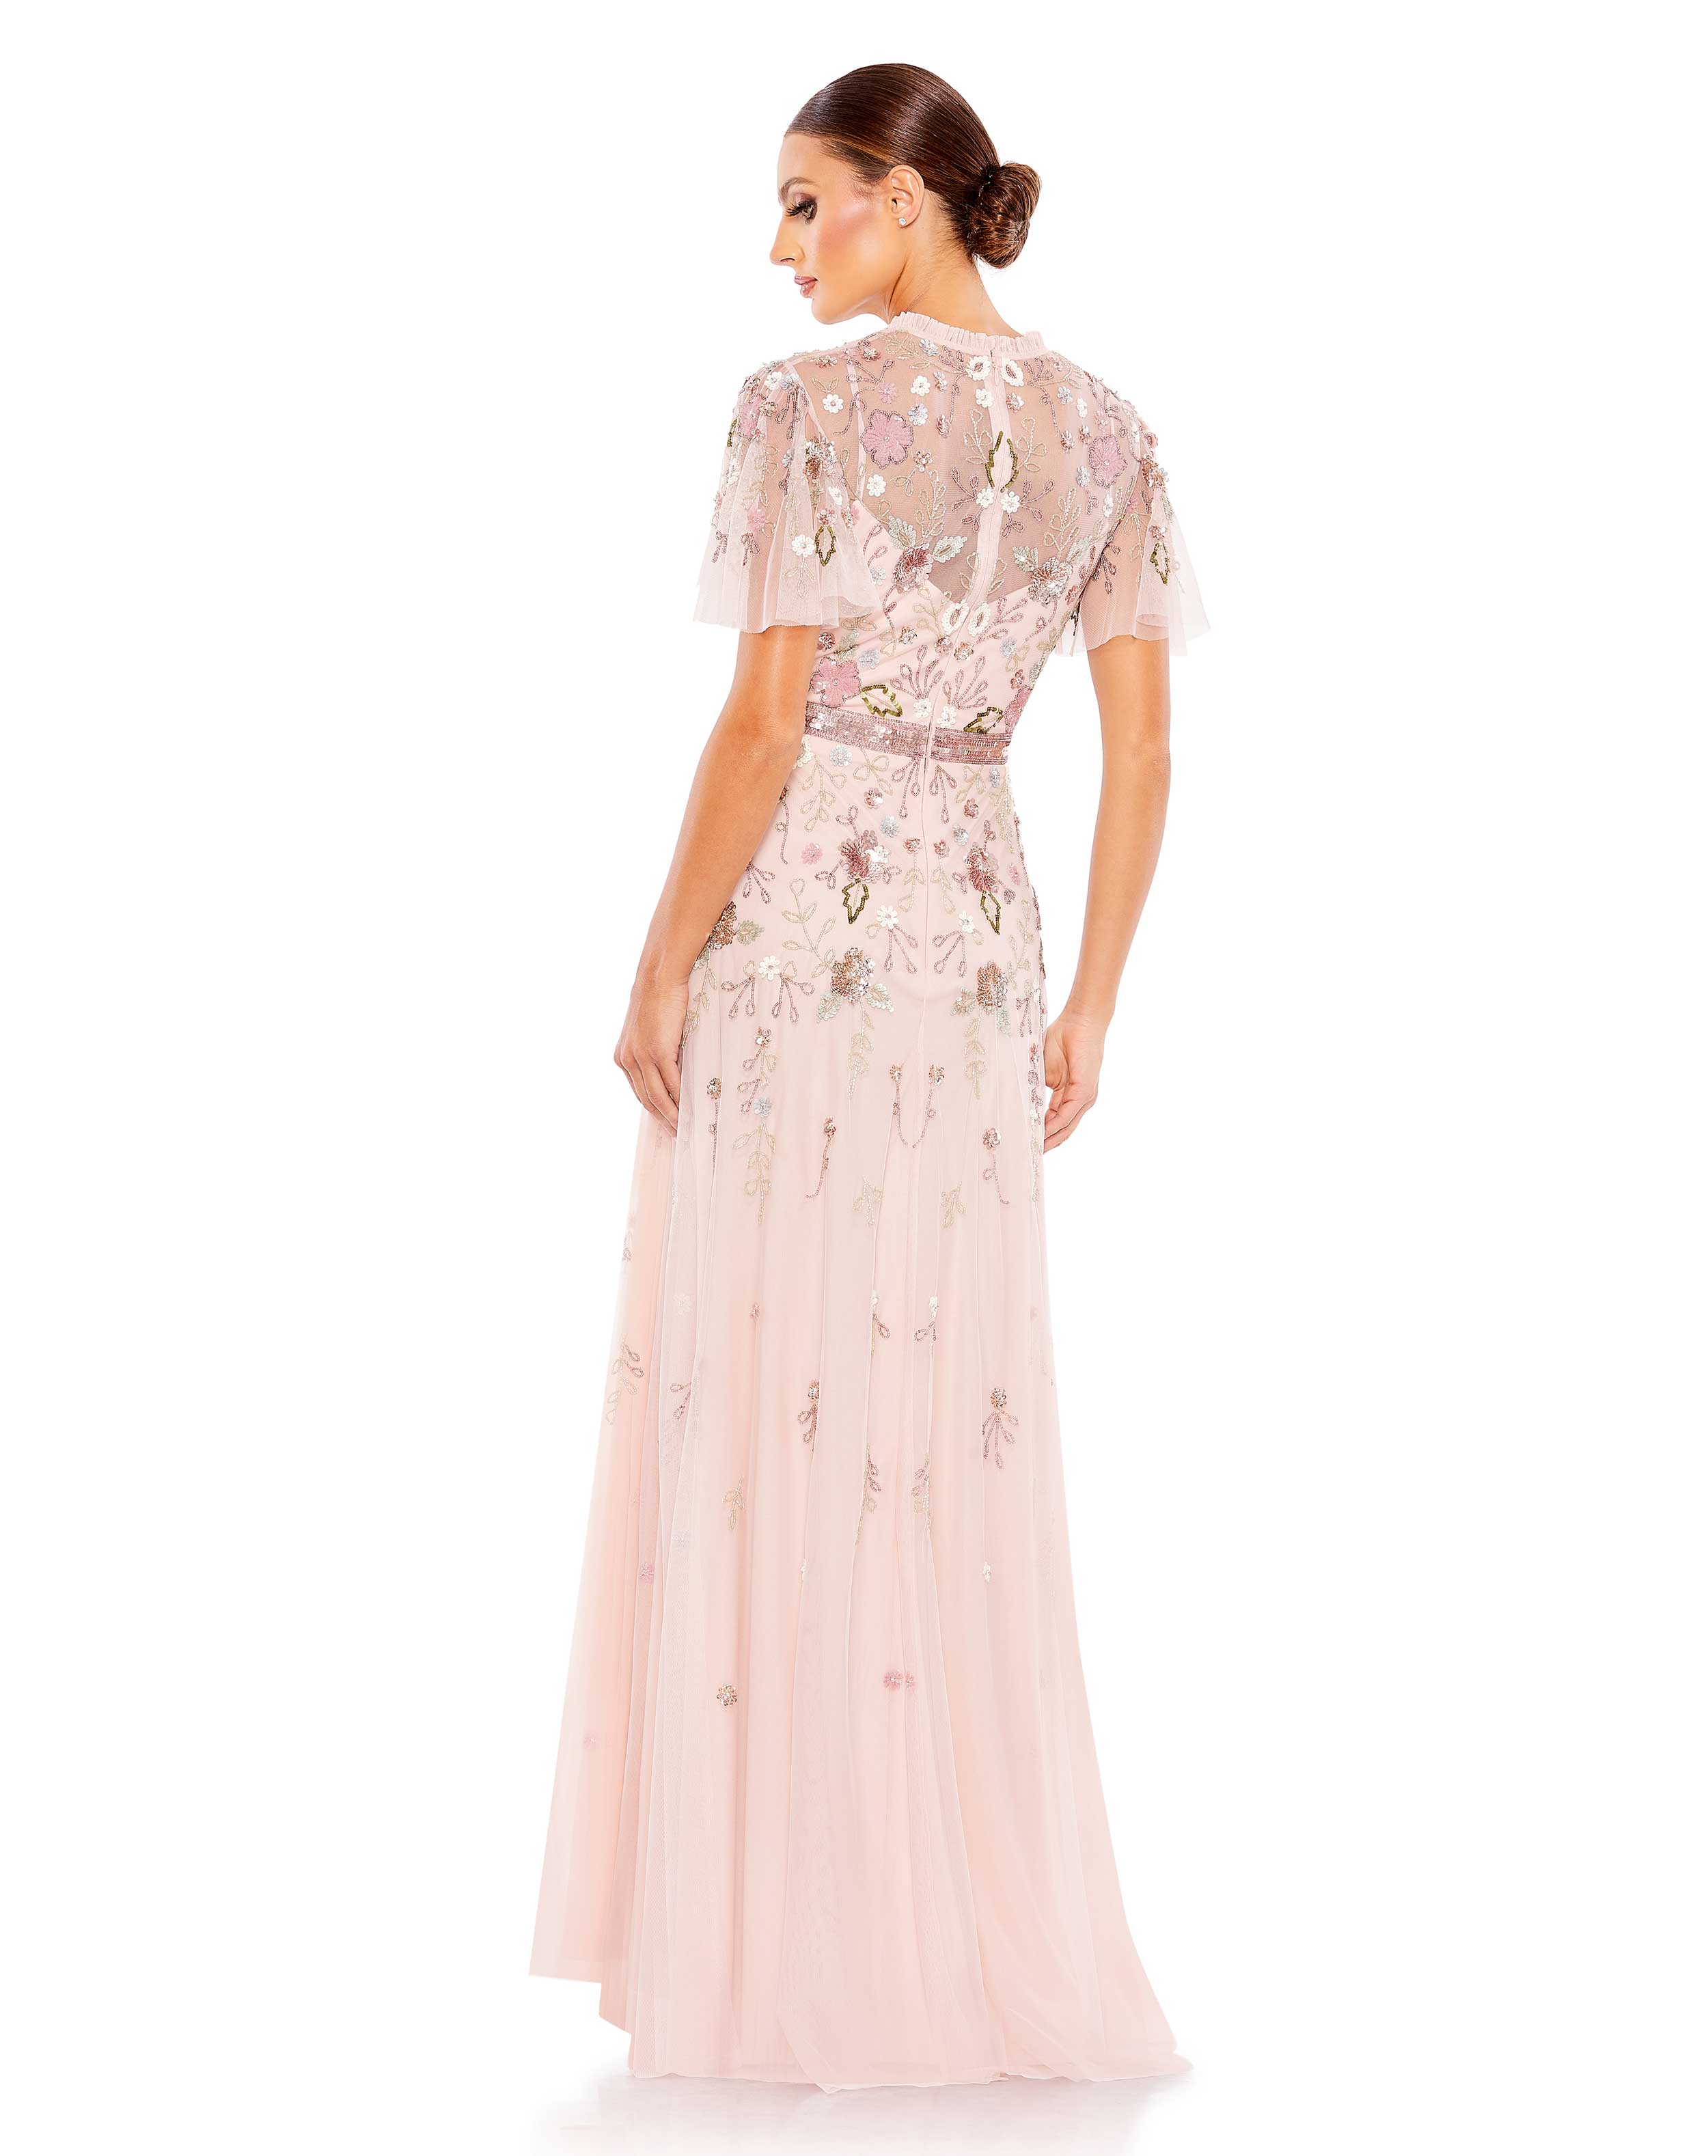 Embellished High Neck Butterfly Sleeve Gown